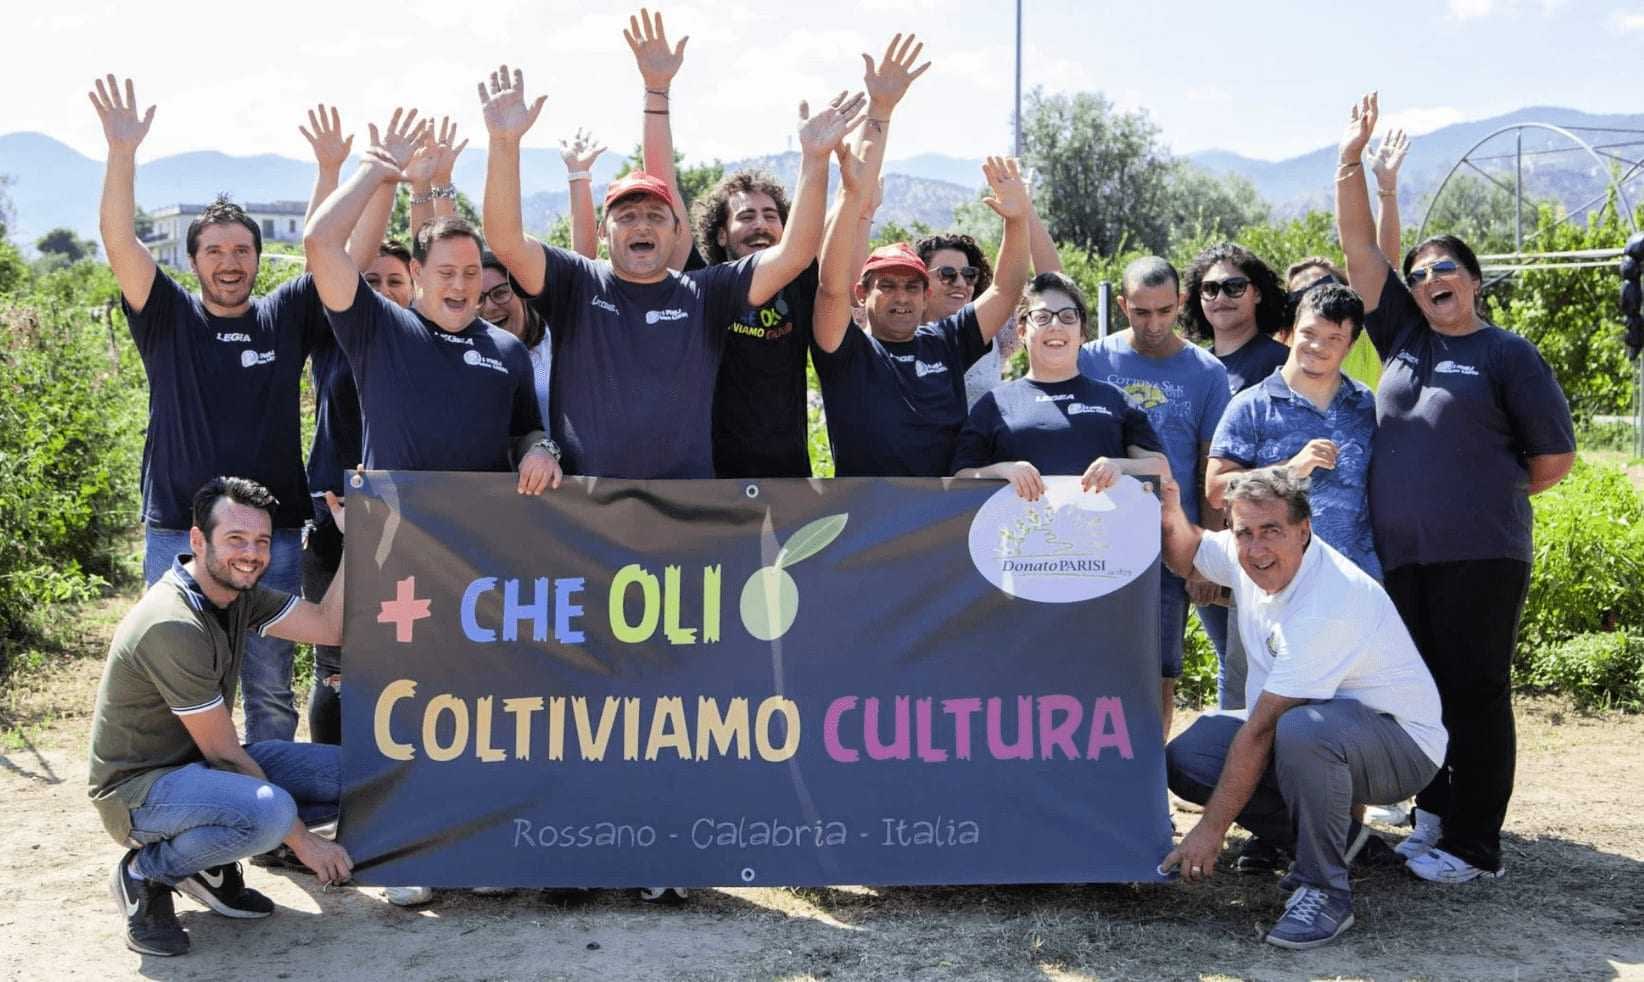 world-the-best-olive-oils-competitions-europe-strong-showing-by-calabrian-producers-at-world-competition-olive-oil-times